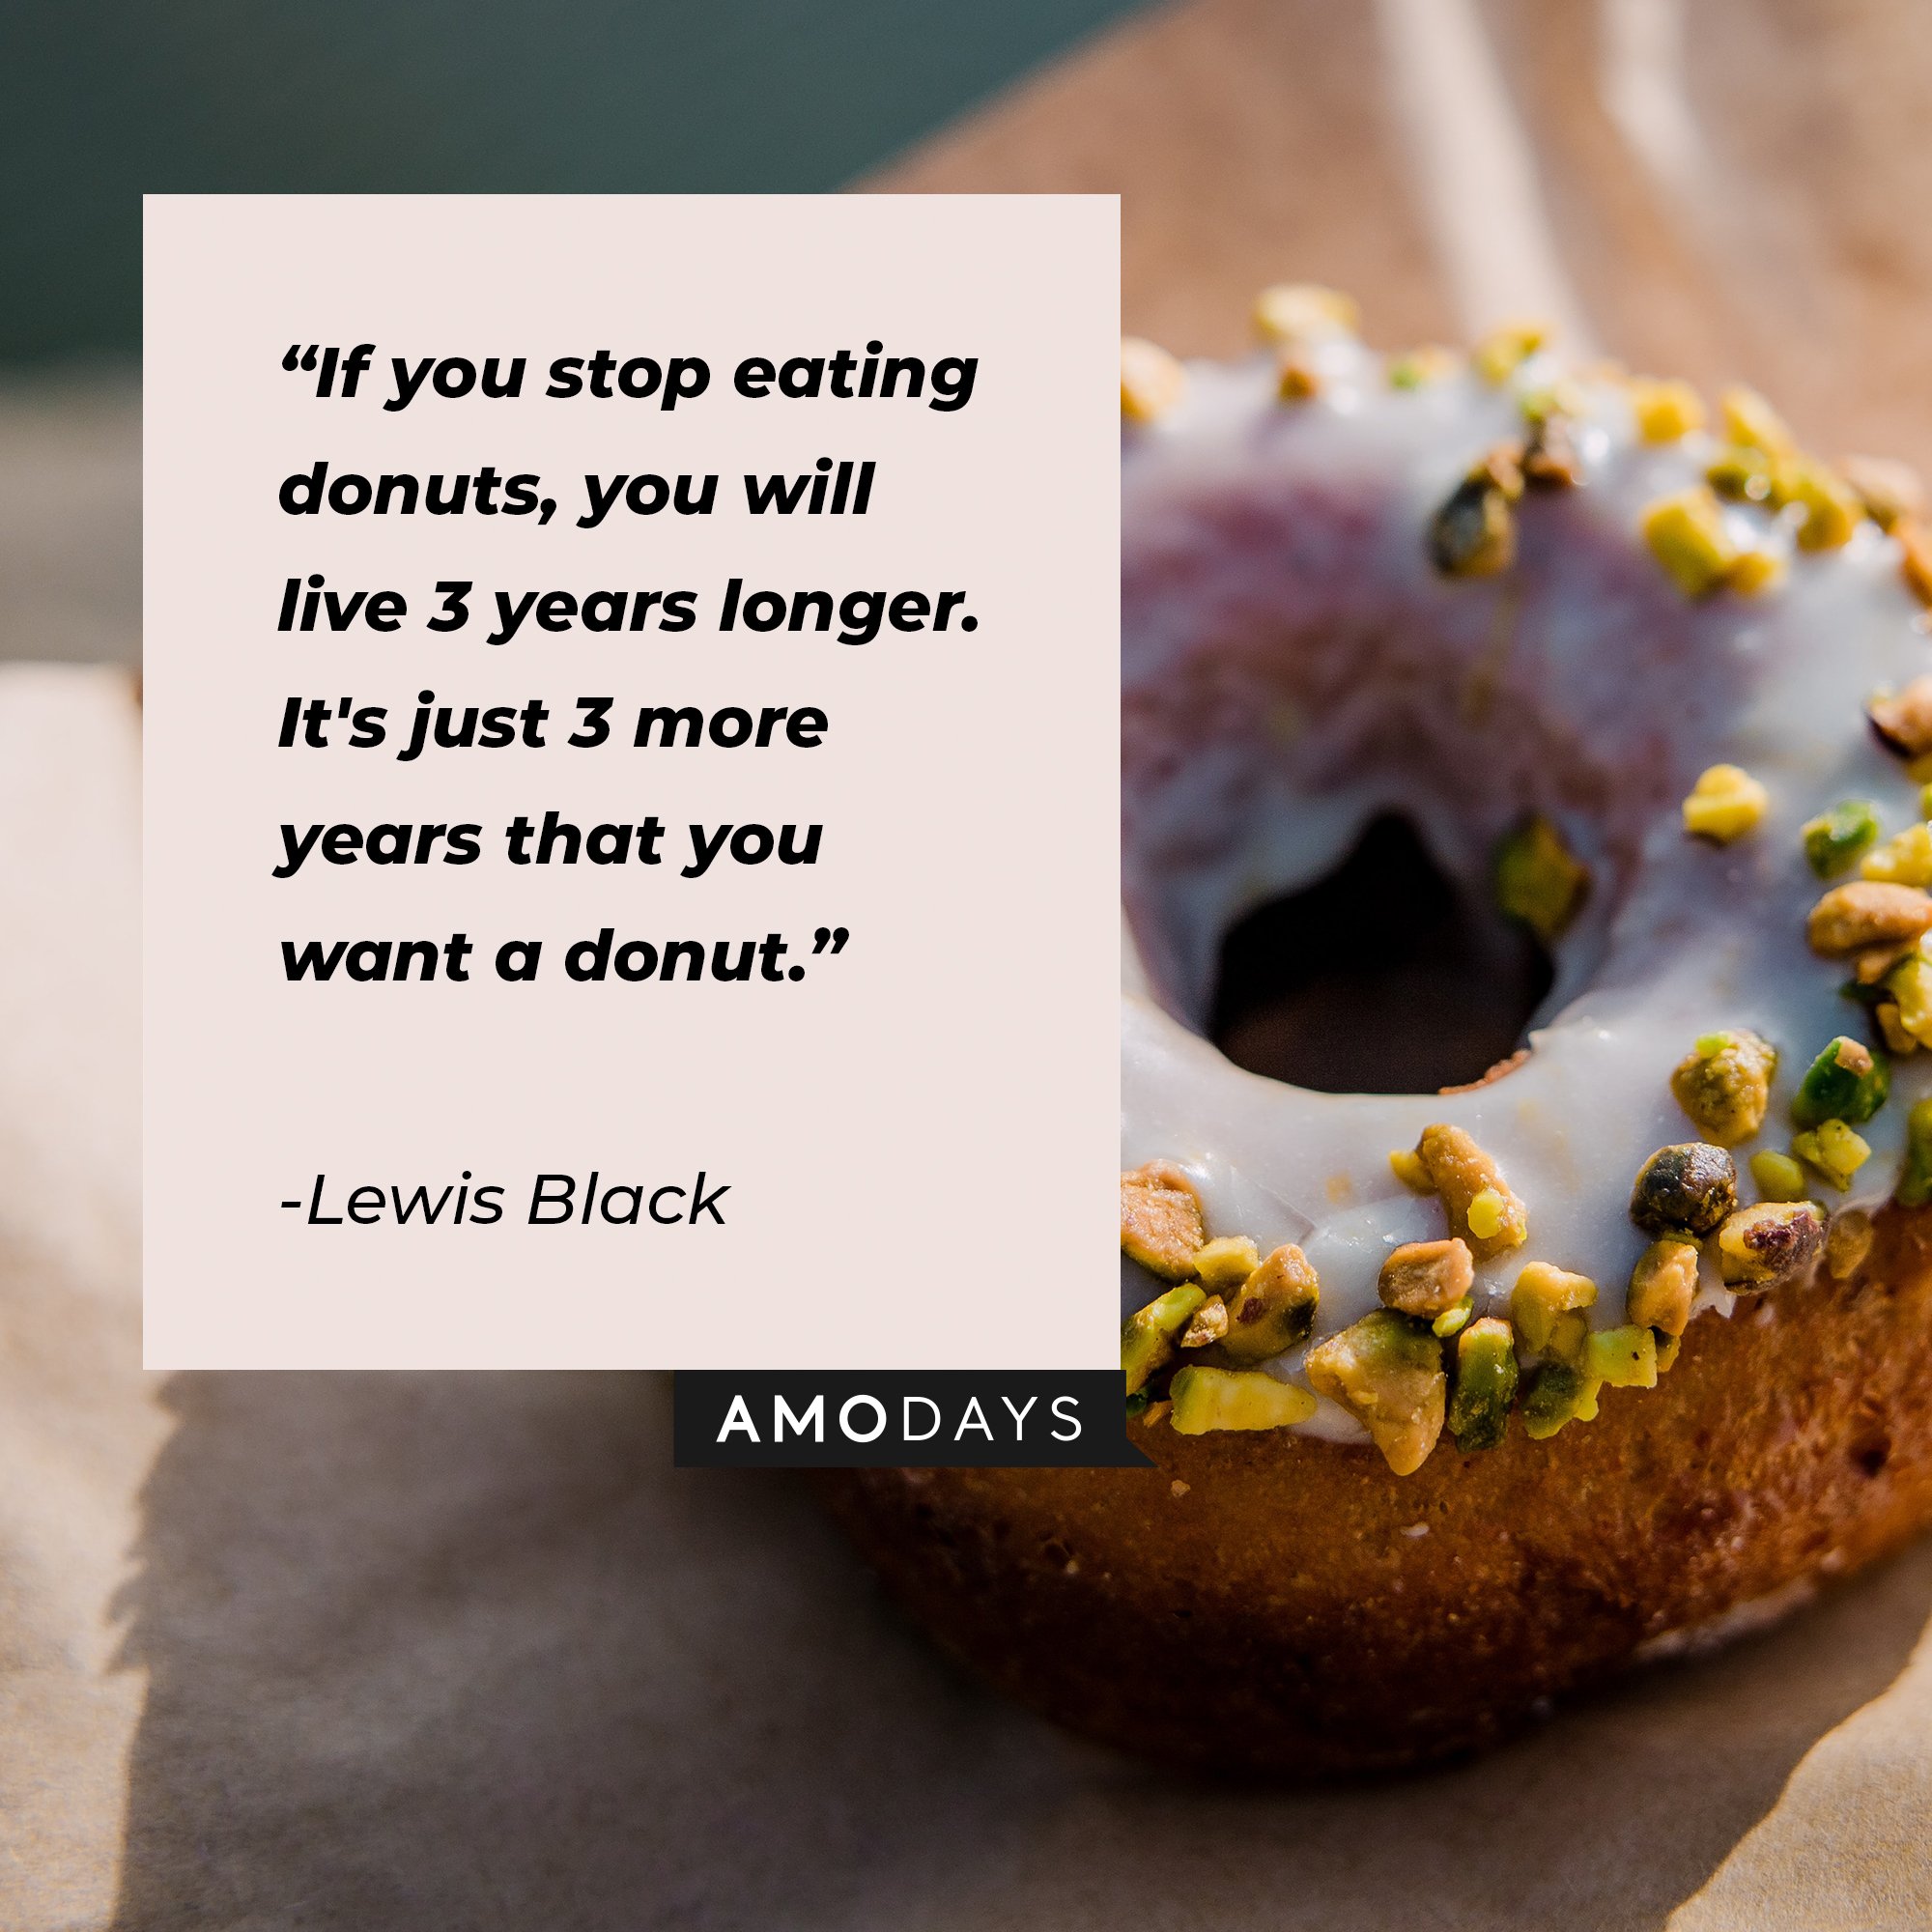 Lewis Black's quote: "If you stop eating donuts, you will live 3 years longer. It's just 3 more years that you want a donut." | Image: AmoDays